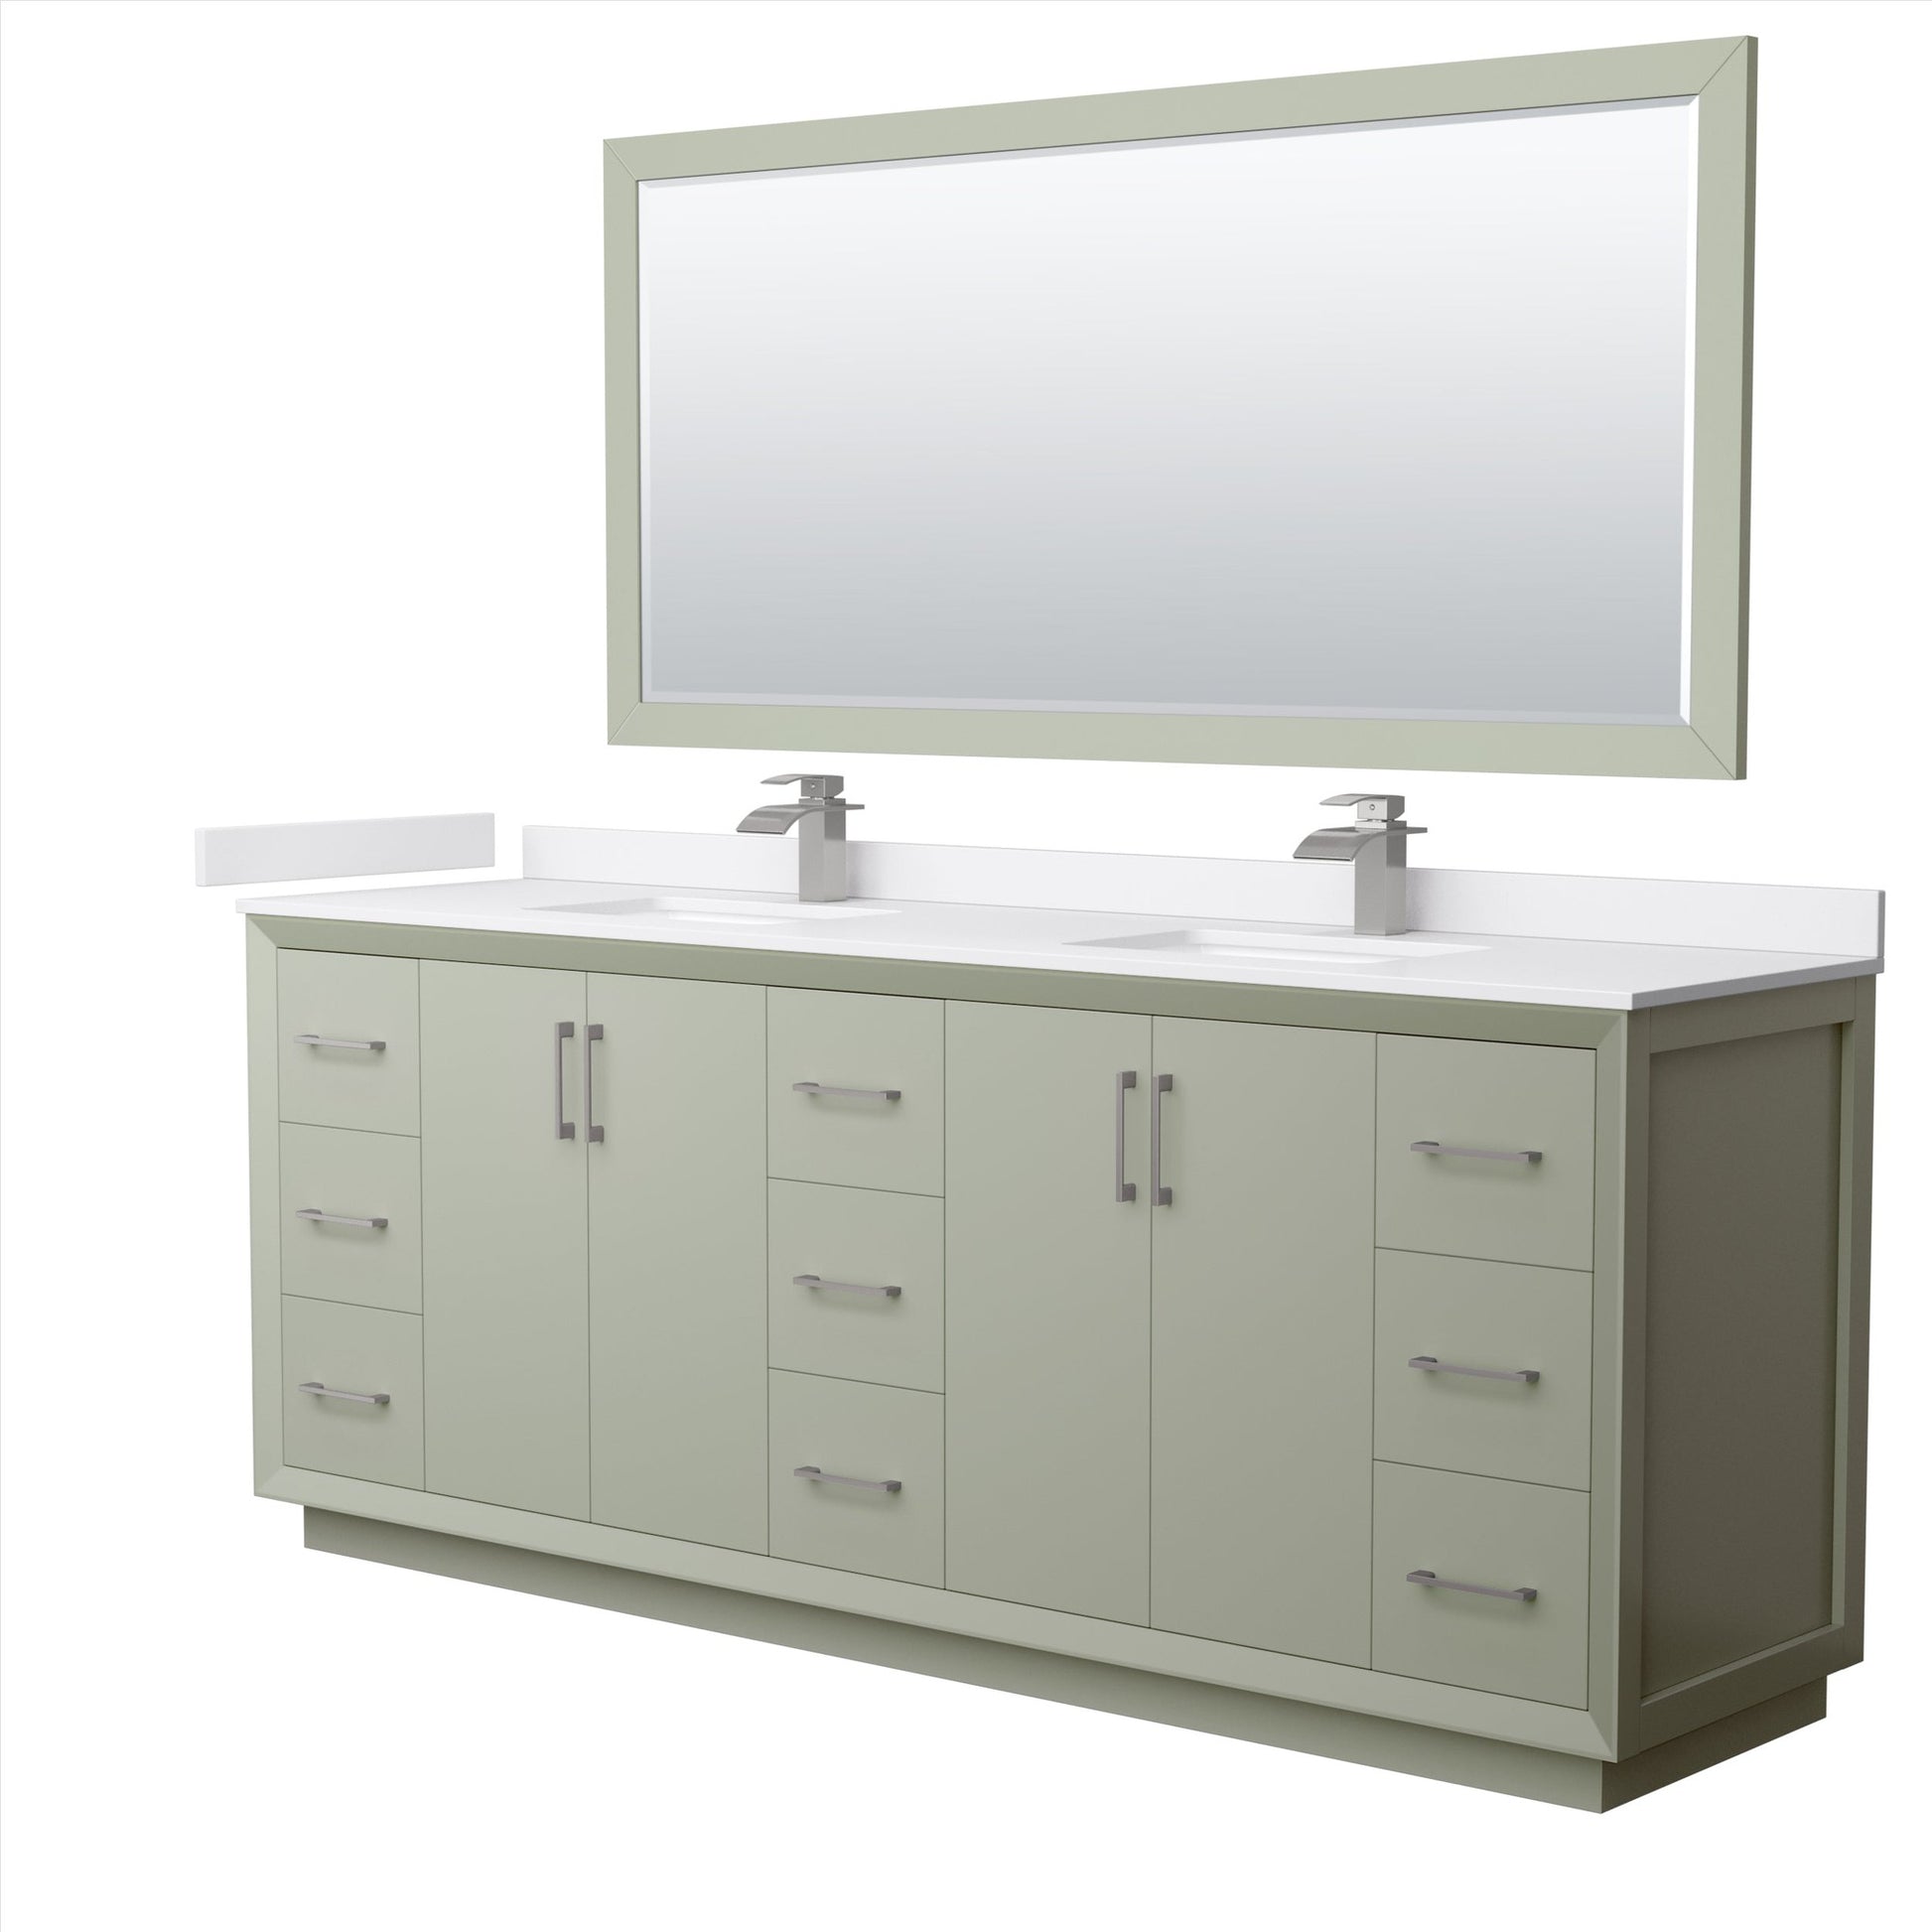 Wyndham Collection Strada 84" Double Bathroom Vanity in Light Green, White Cultured Marble Countertop, Undermount Square Sinks, Brushed Nickel Trim, 70" Mirror